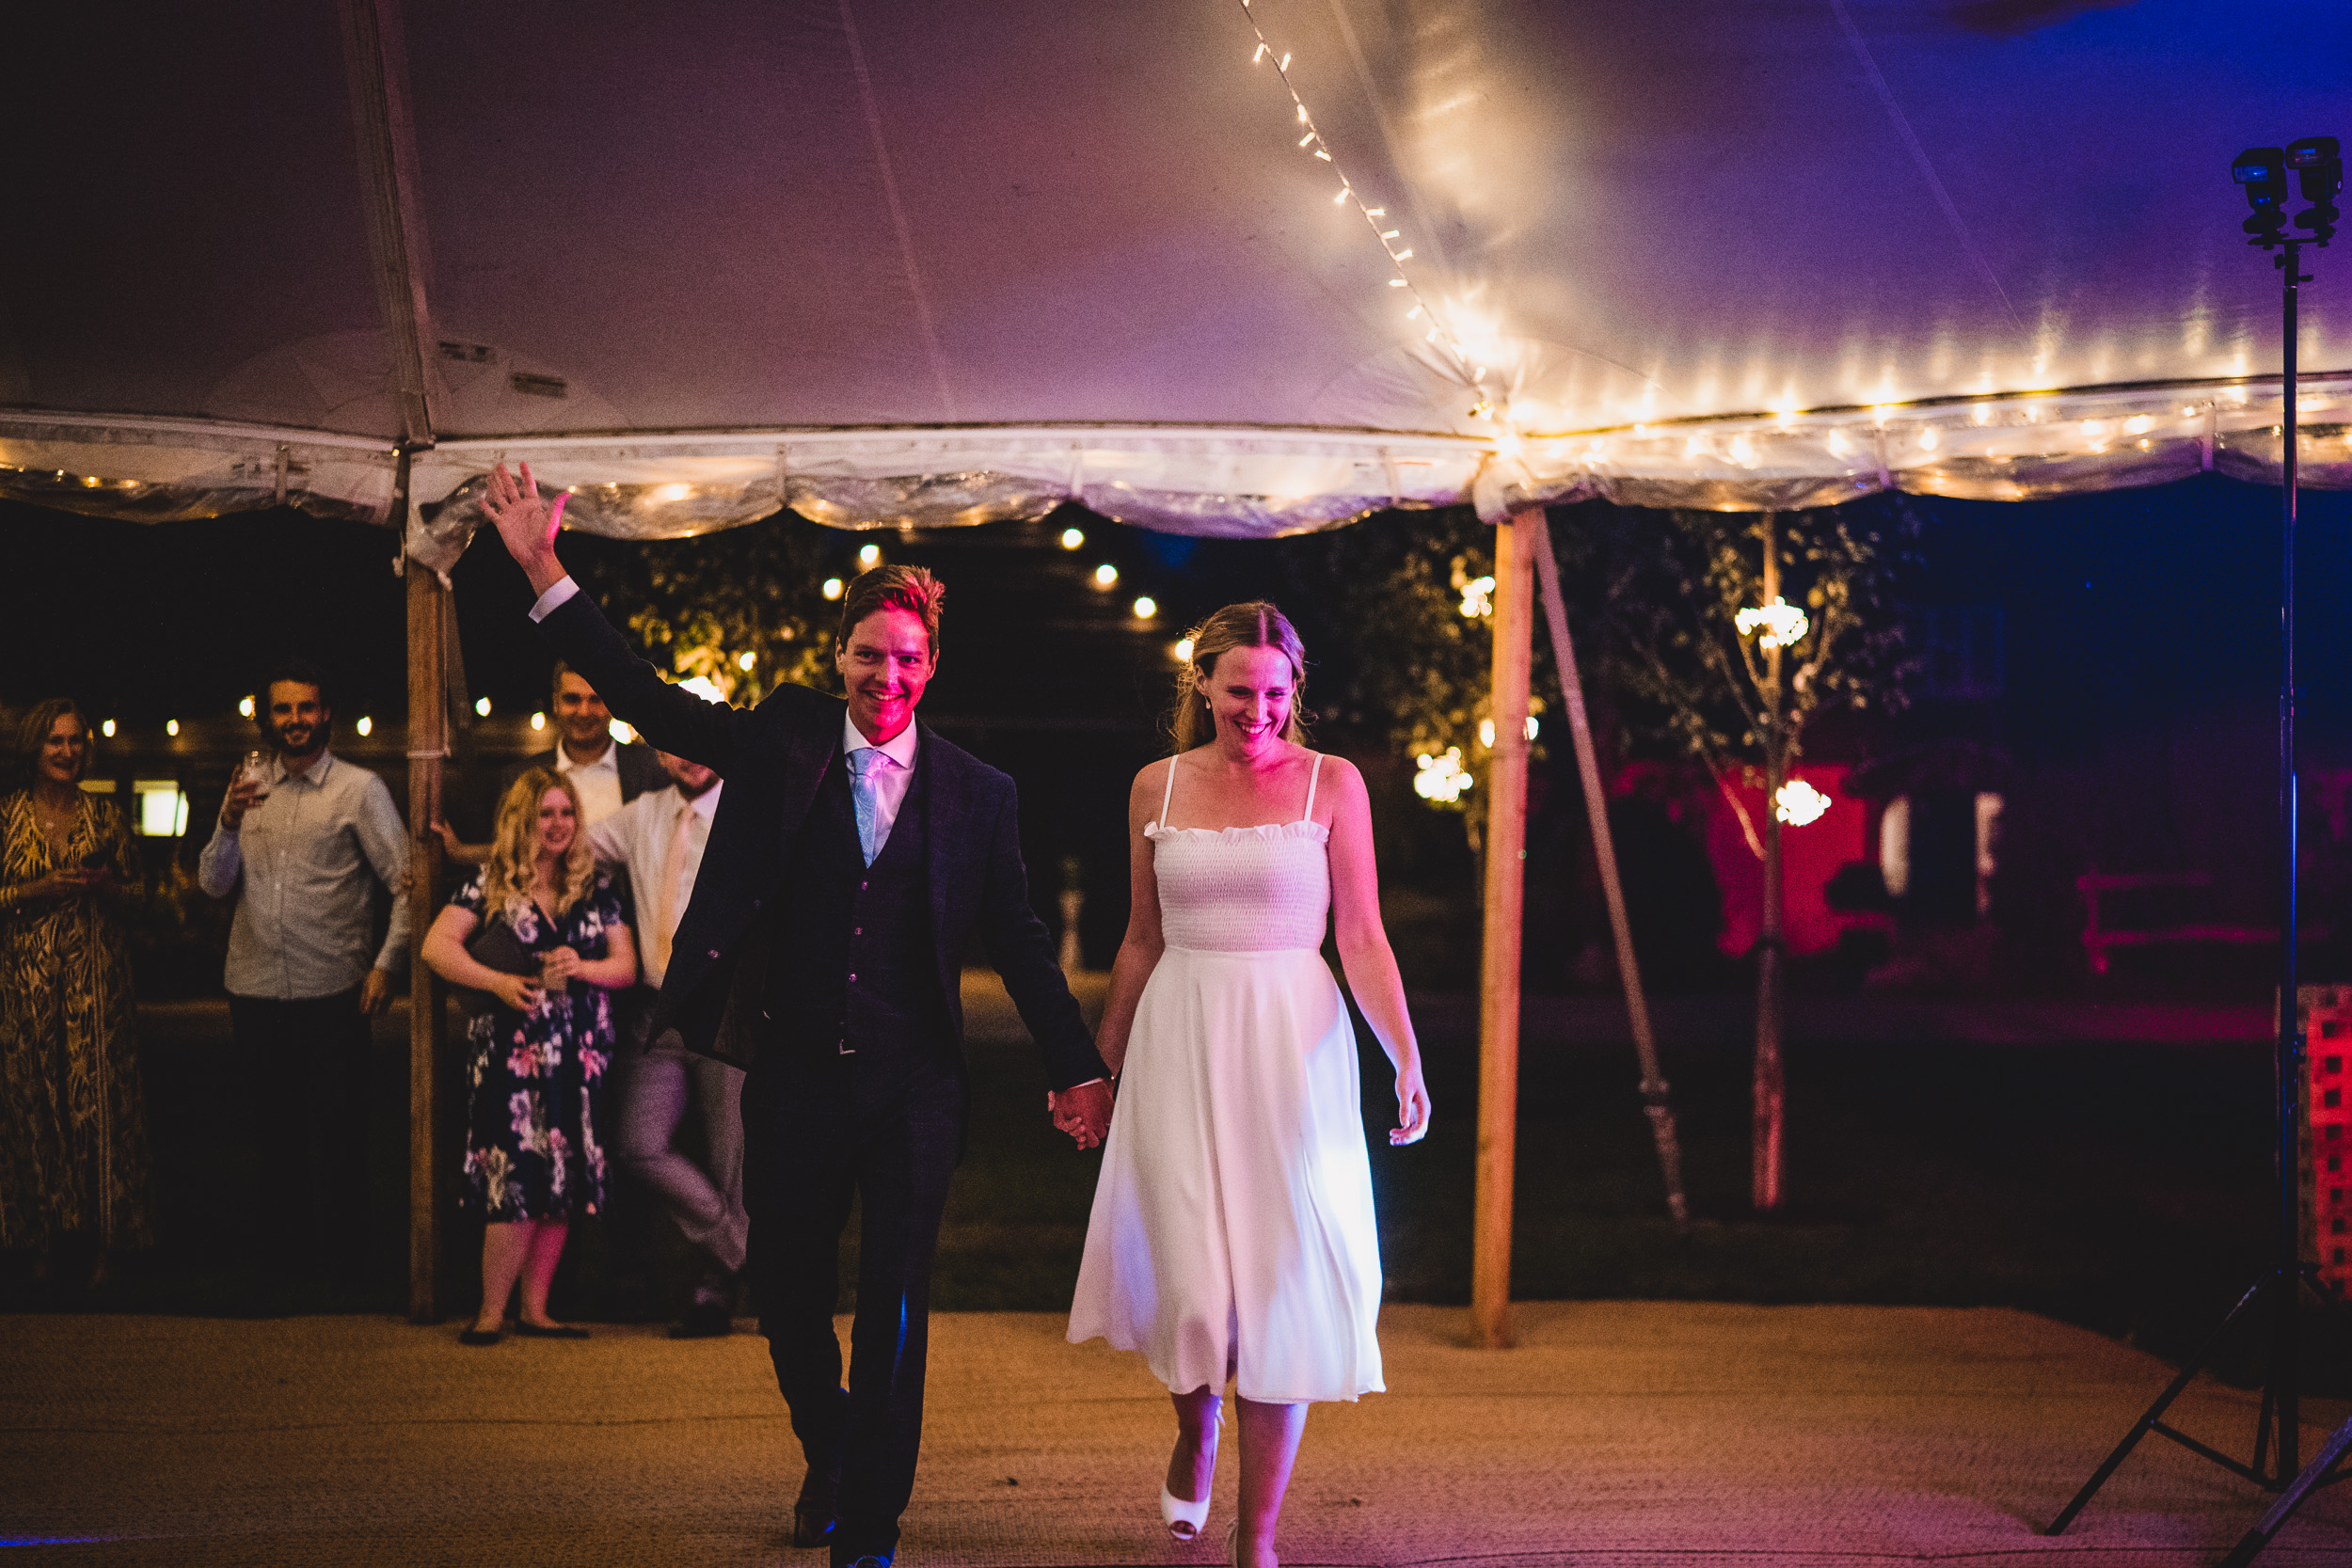 A wedding photographer captures a bride and groom walking down the aisle at their wedding reception.